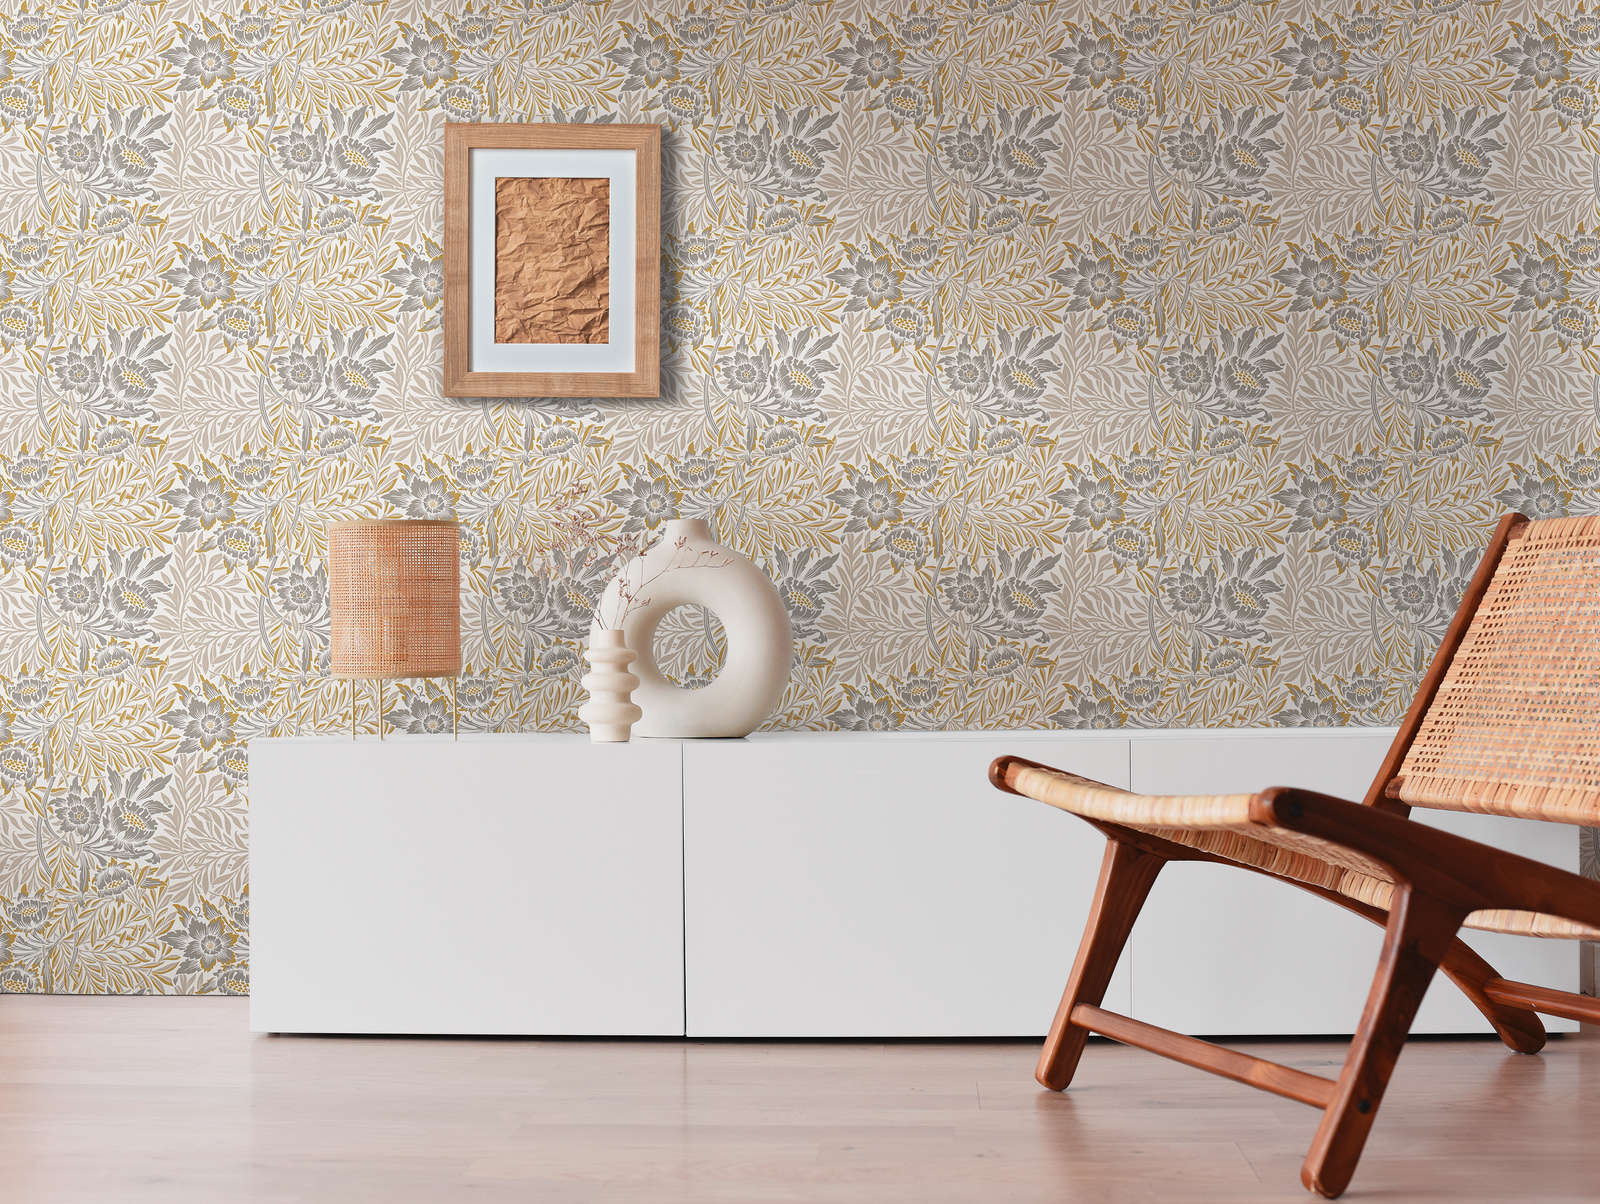             Non-woven wallpaper with various flowers and leaf tendrils - gold, beige, silver
        